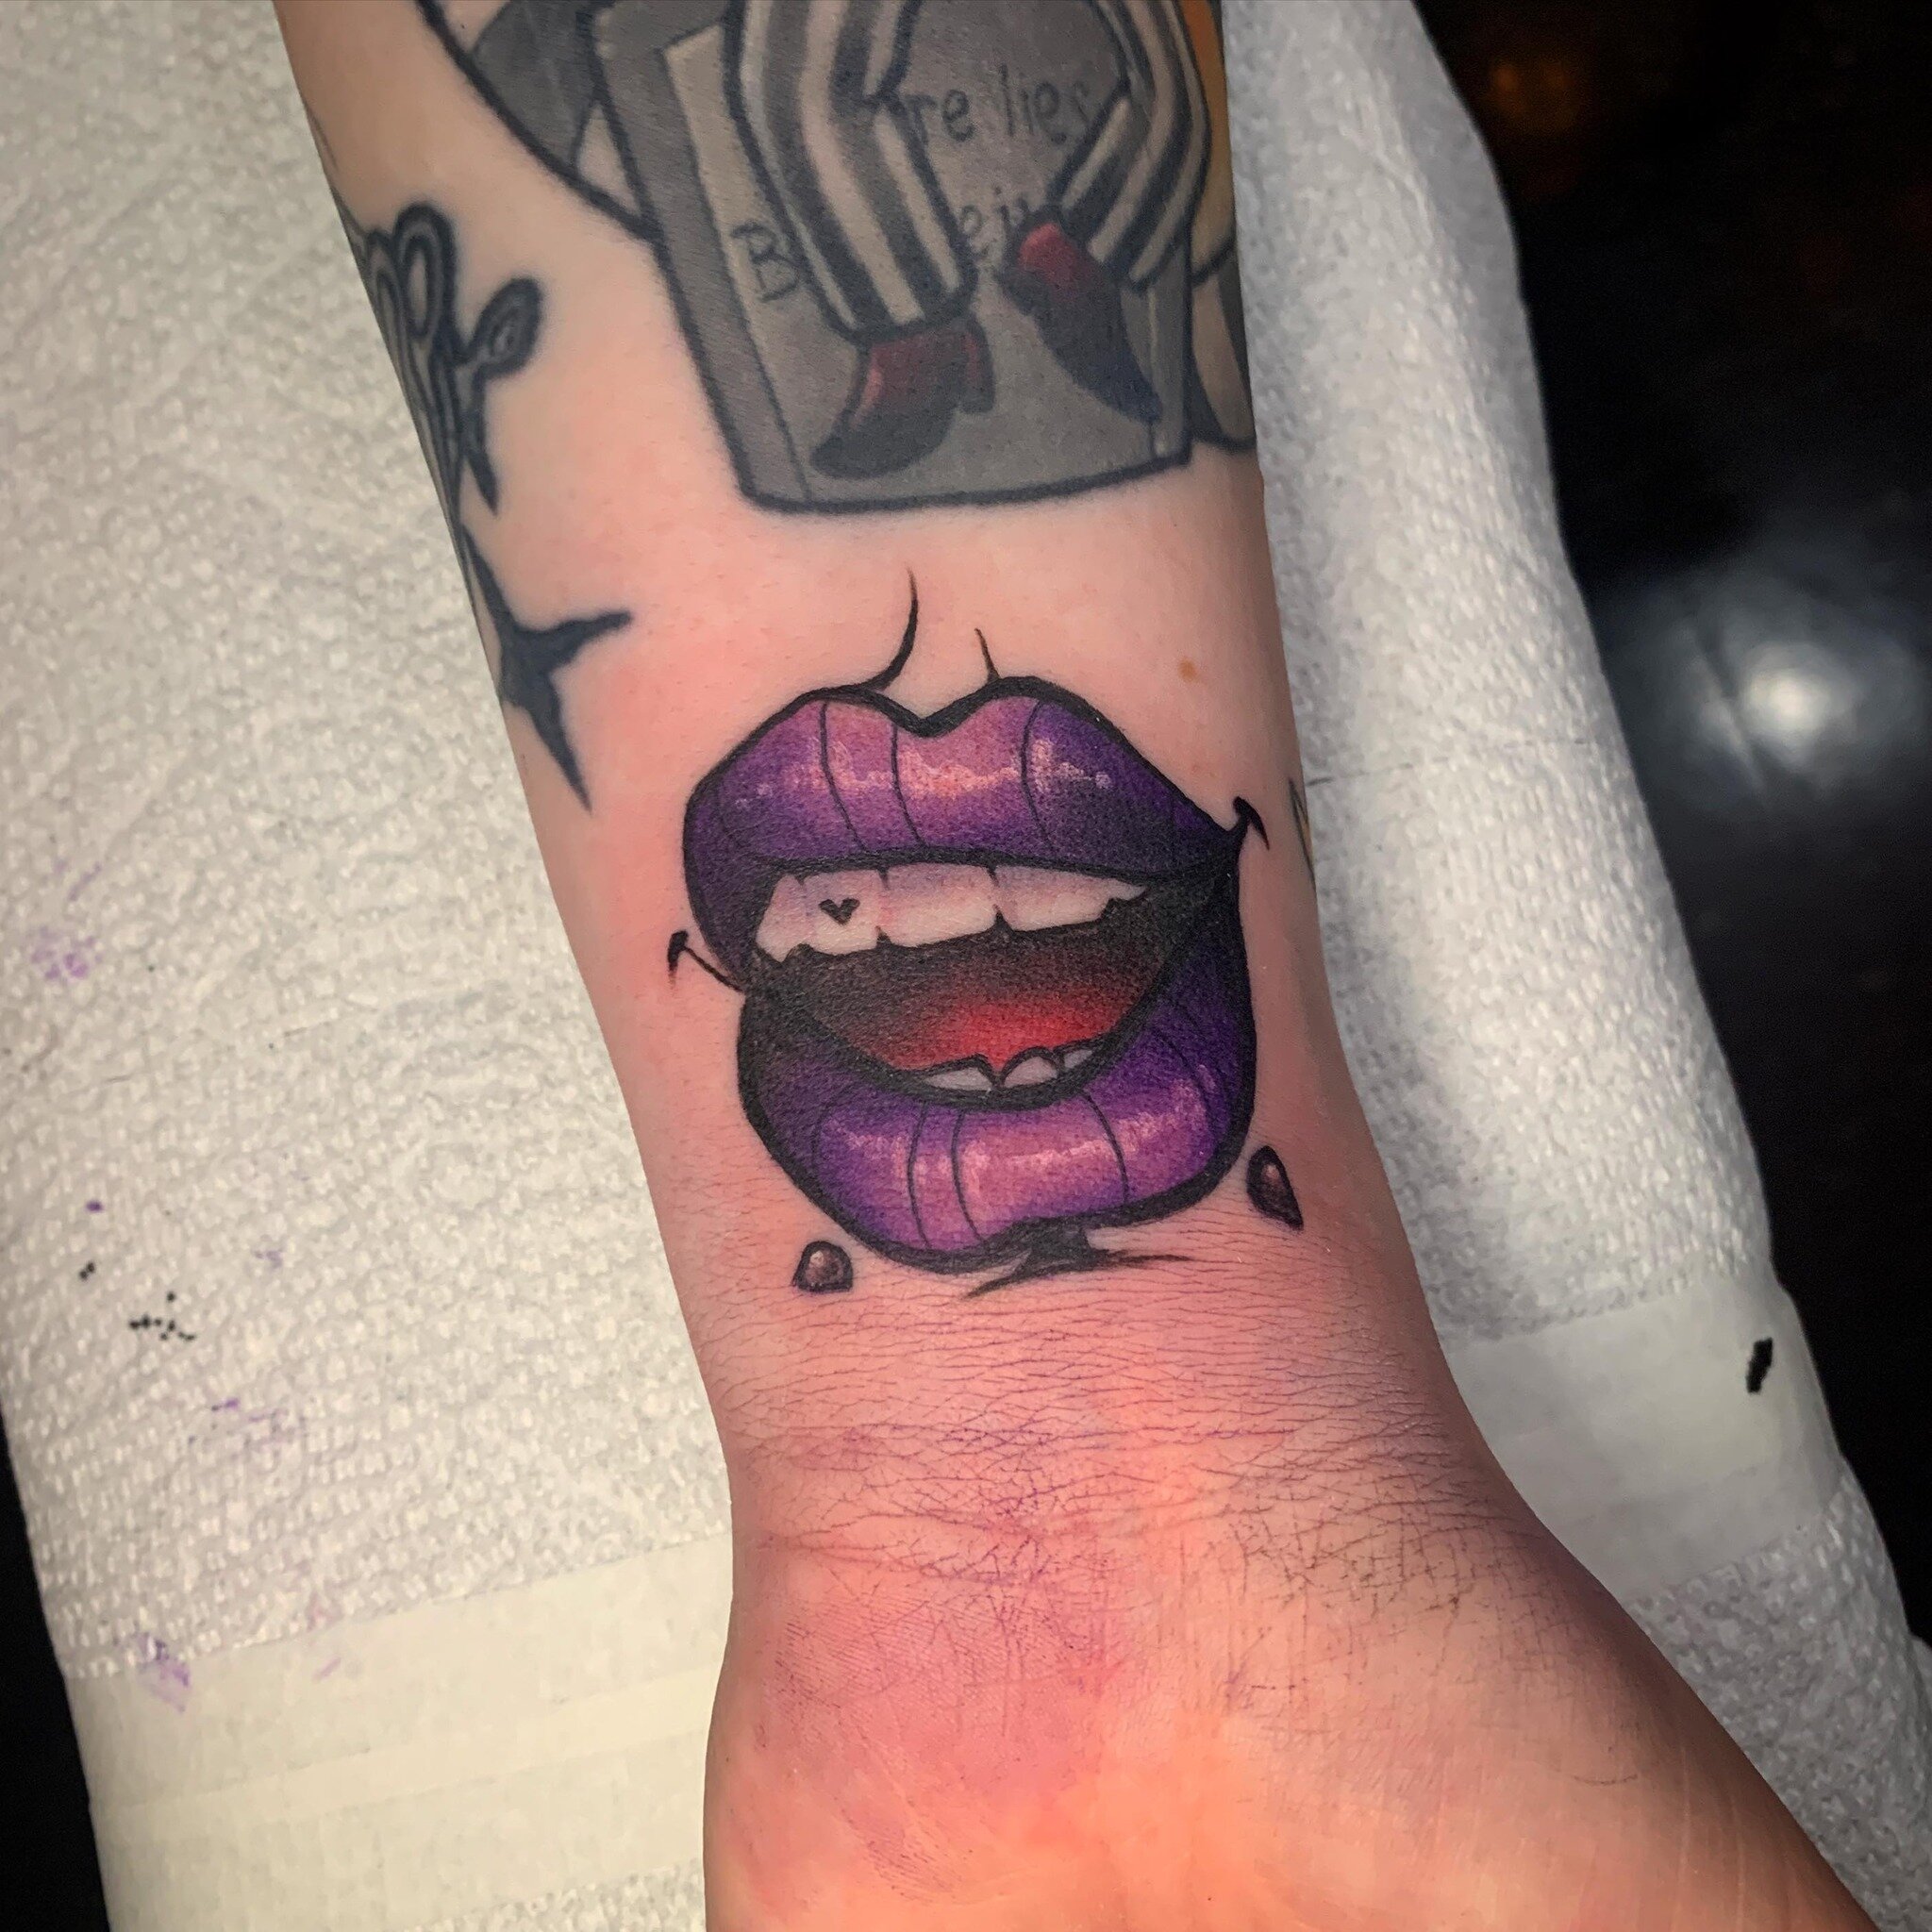 A sassy mouth, from my flash!
Done at @vilainstattoo 
.
.
.
***I&rsquo;m only designing tattoos for people who can come to Montreal to get the tattoo. I won&rsquo;t answer messages otherwise. Please don&rsquo;t use my art without my consent.*** *I do